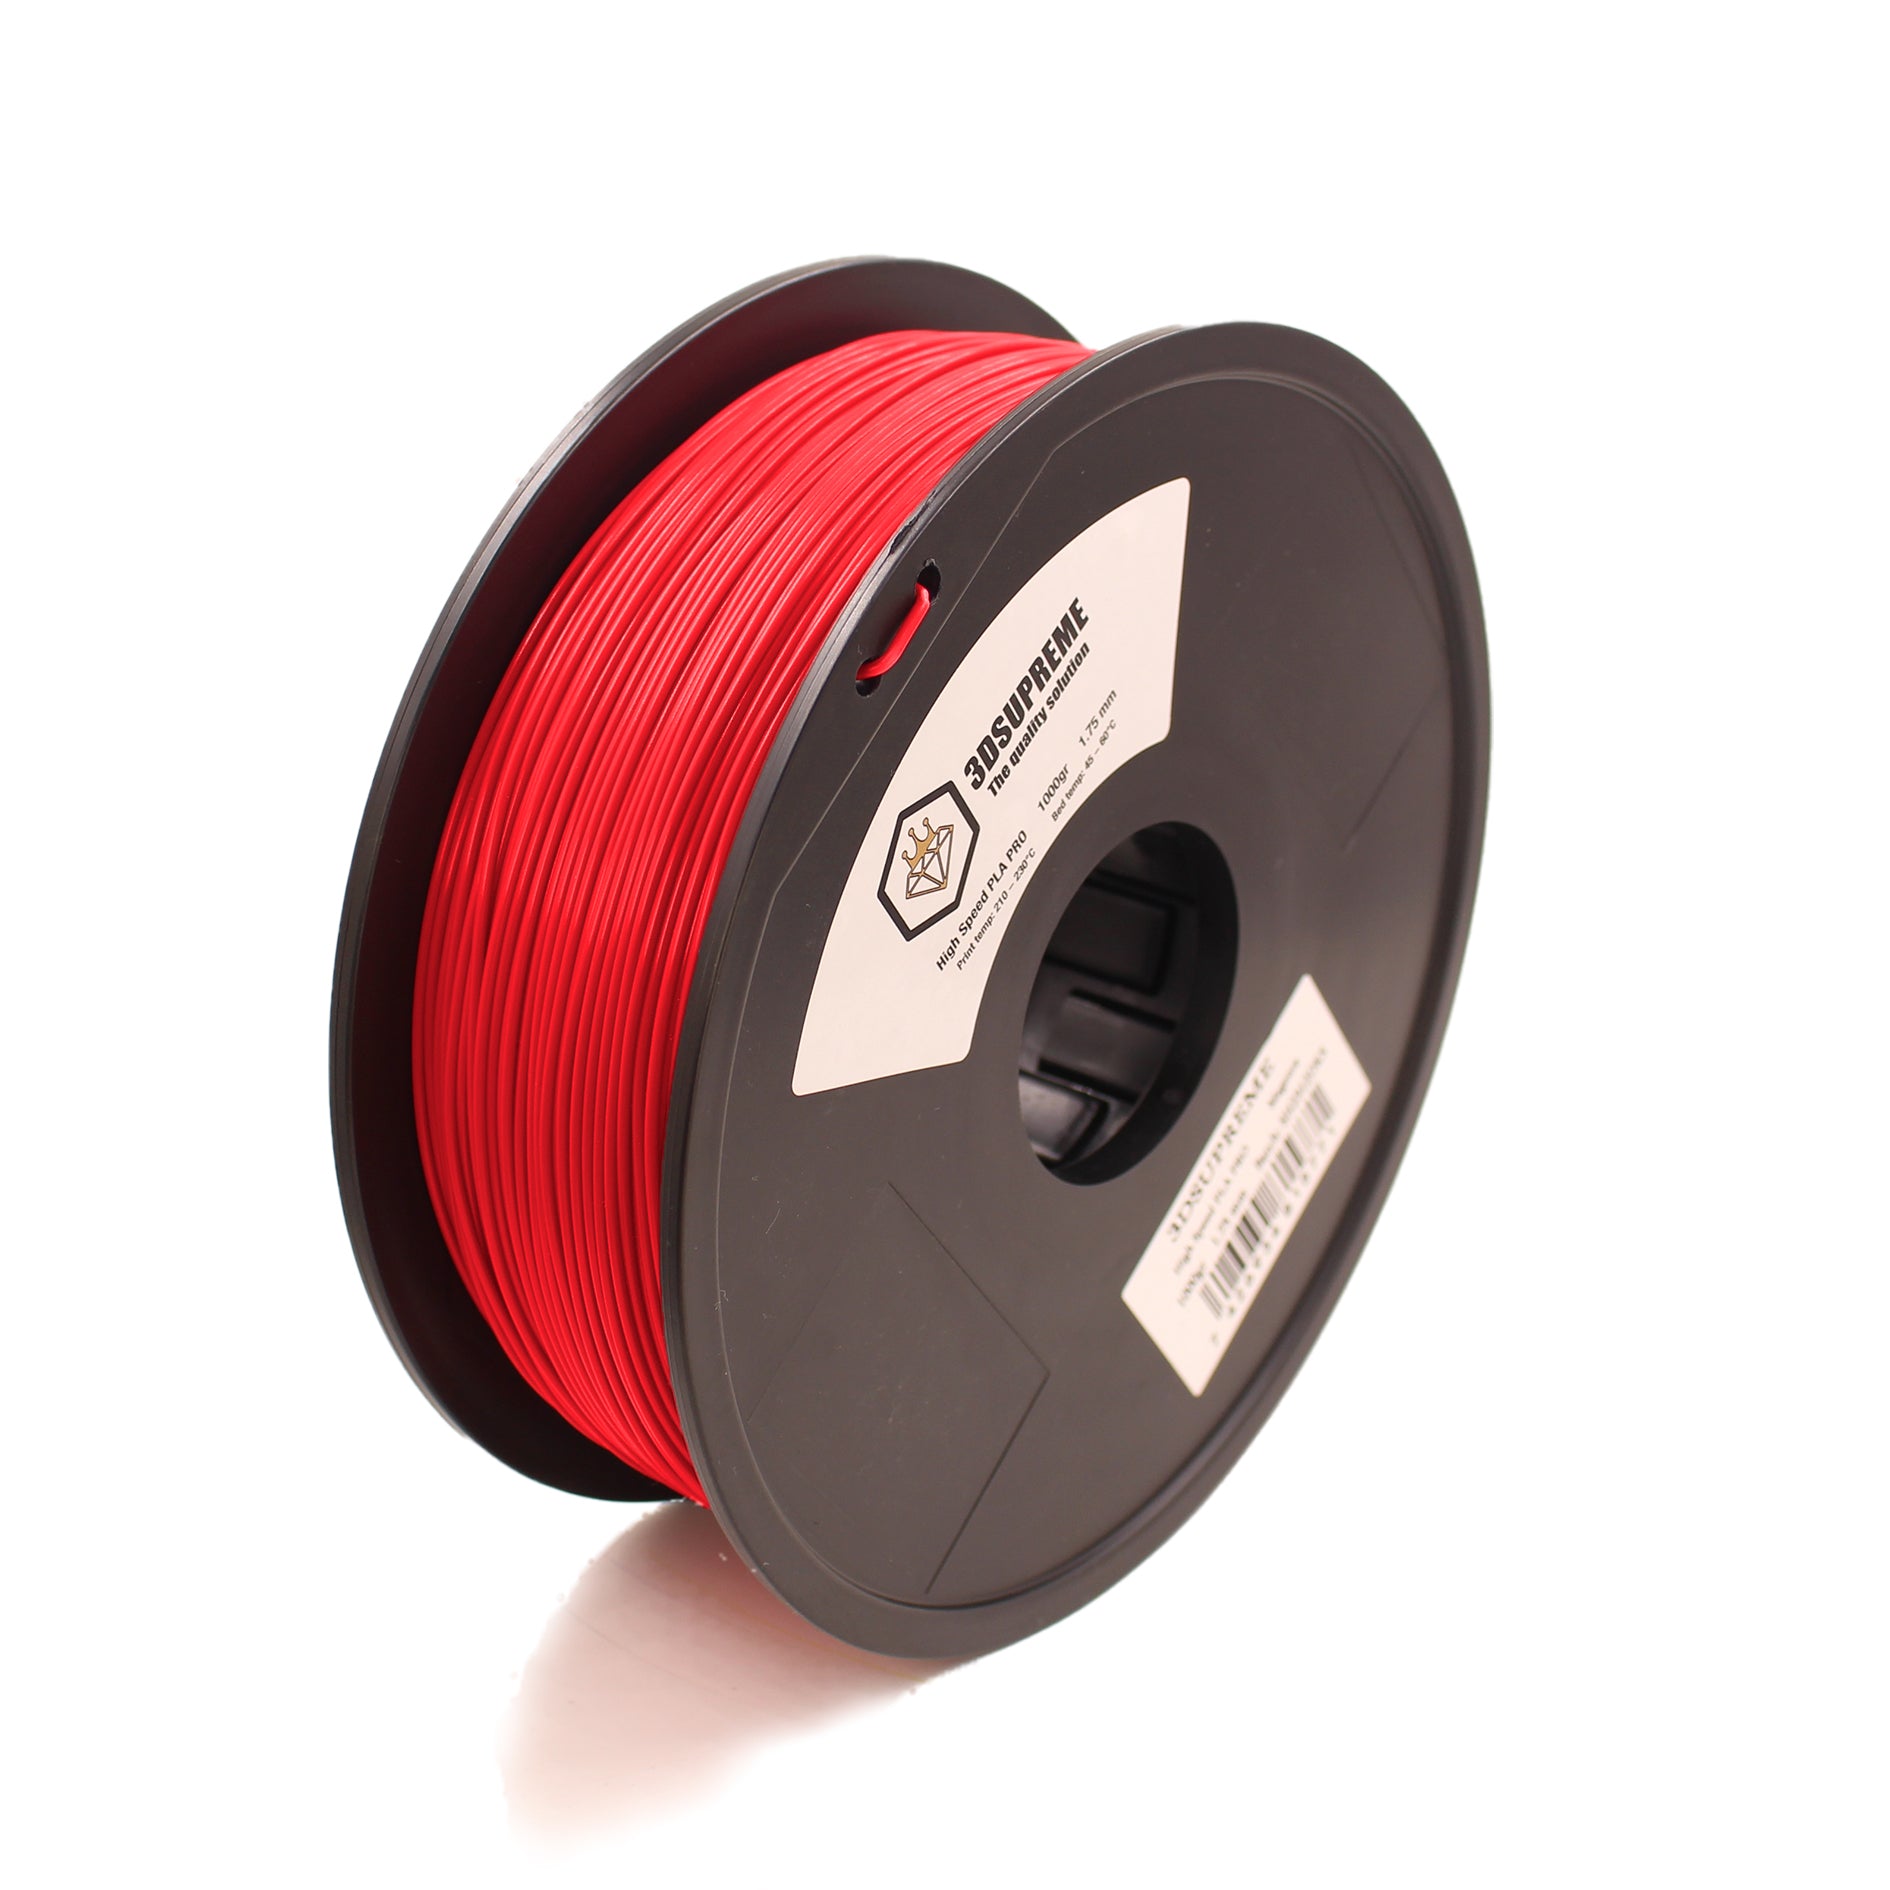 3DSUPREME - High Speed PLA PRO - Fire Red - 1.75mm - 1kg